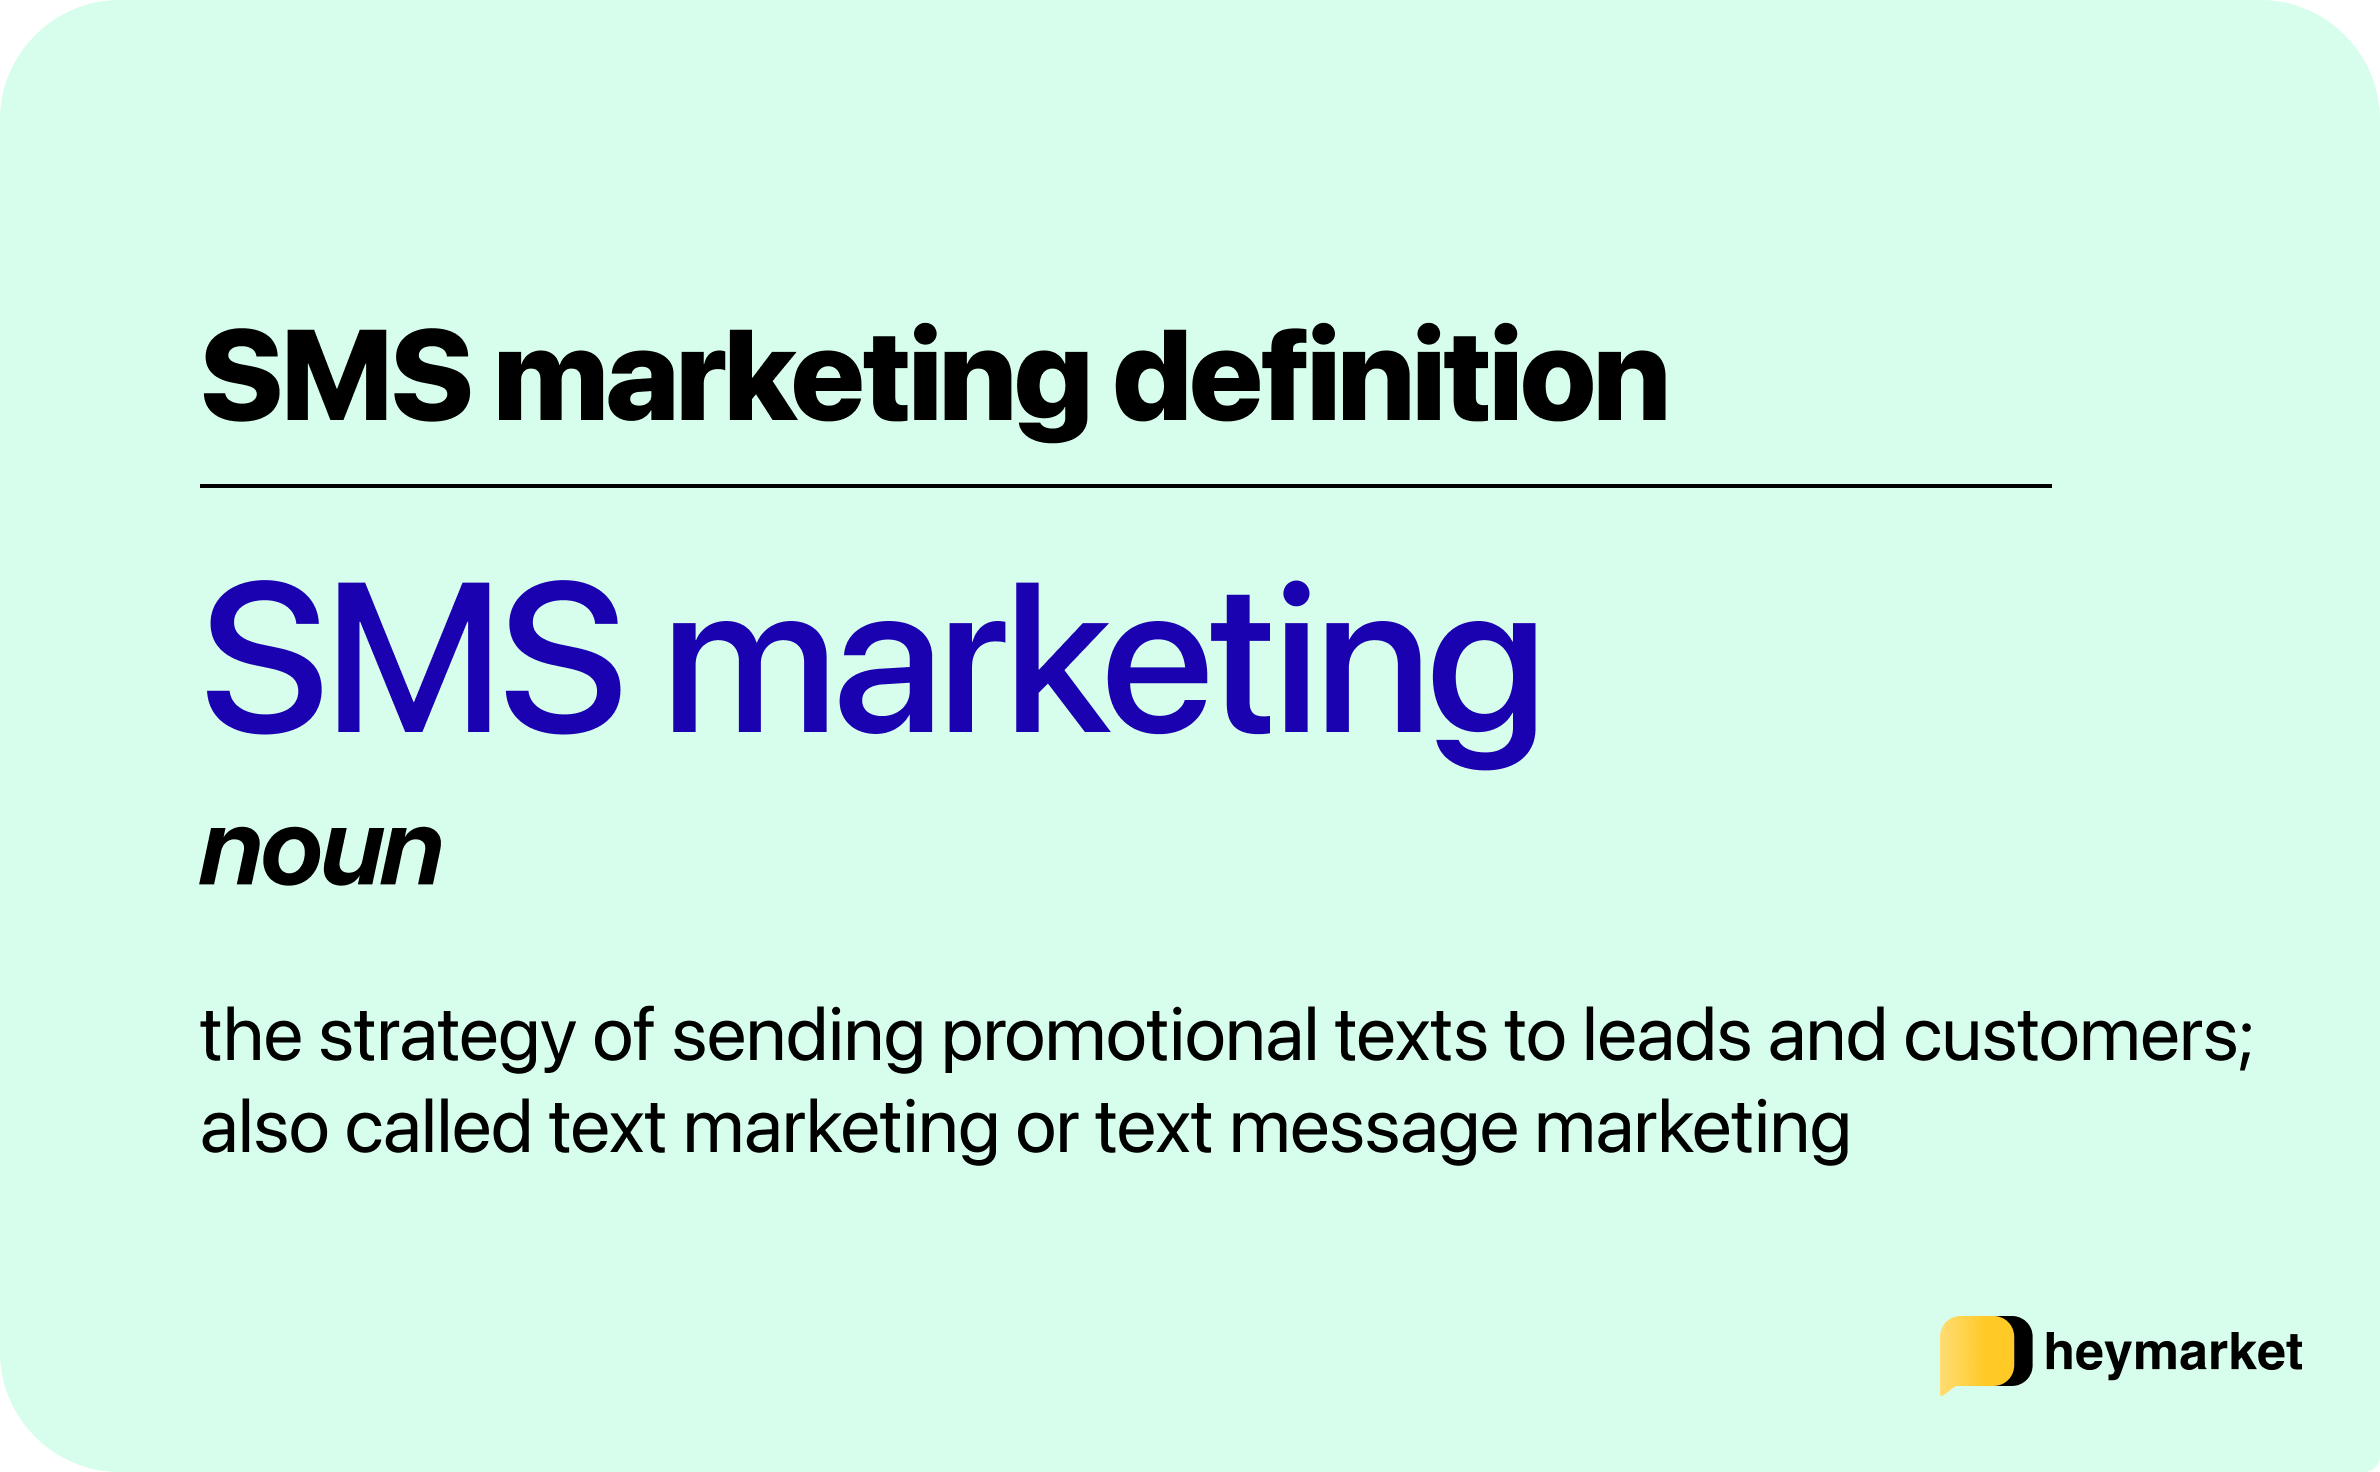 the strategy of sending promotional texts to leads and customers; also called text marketing or text message marketing